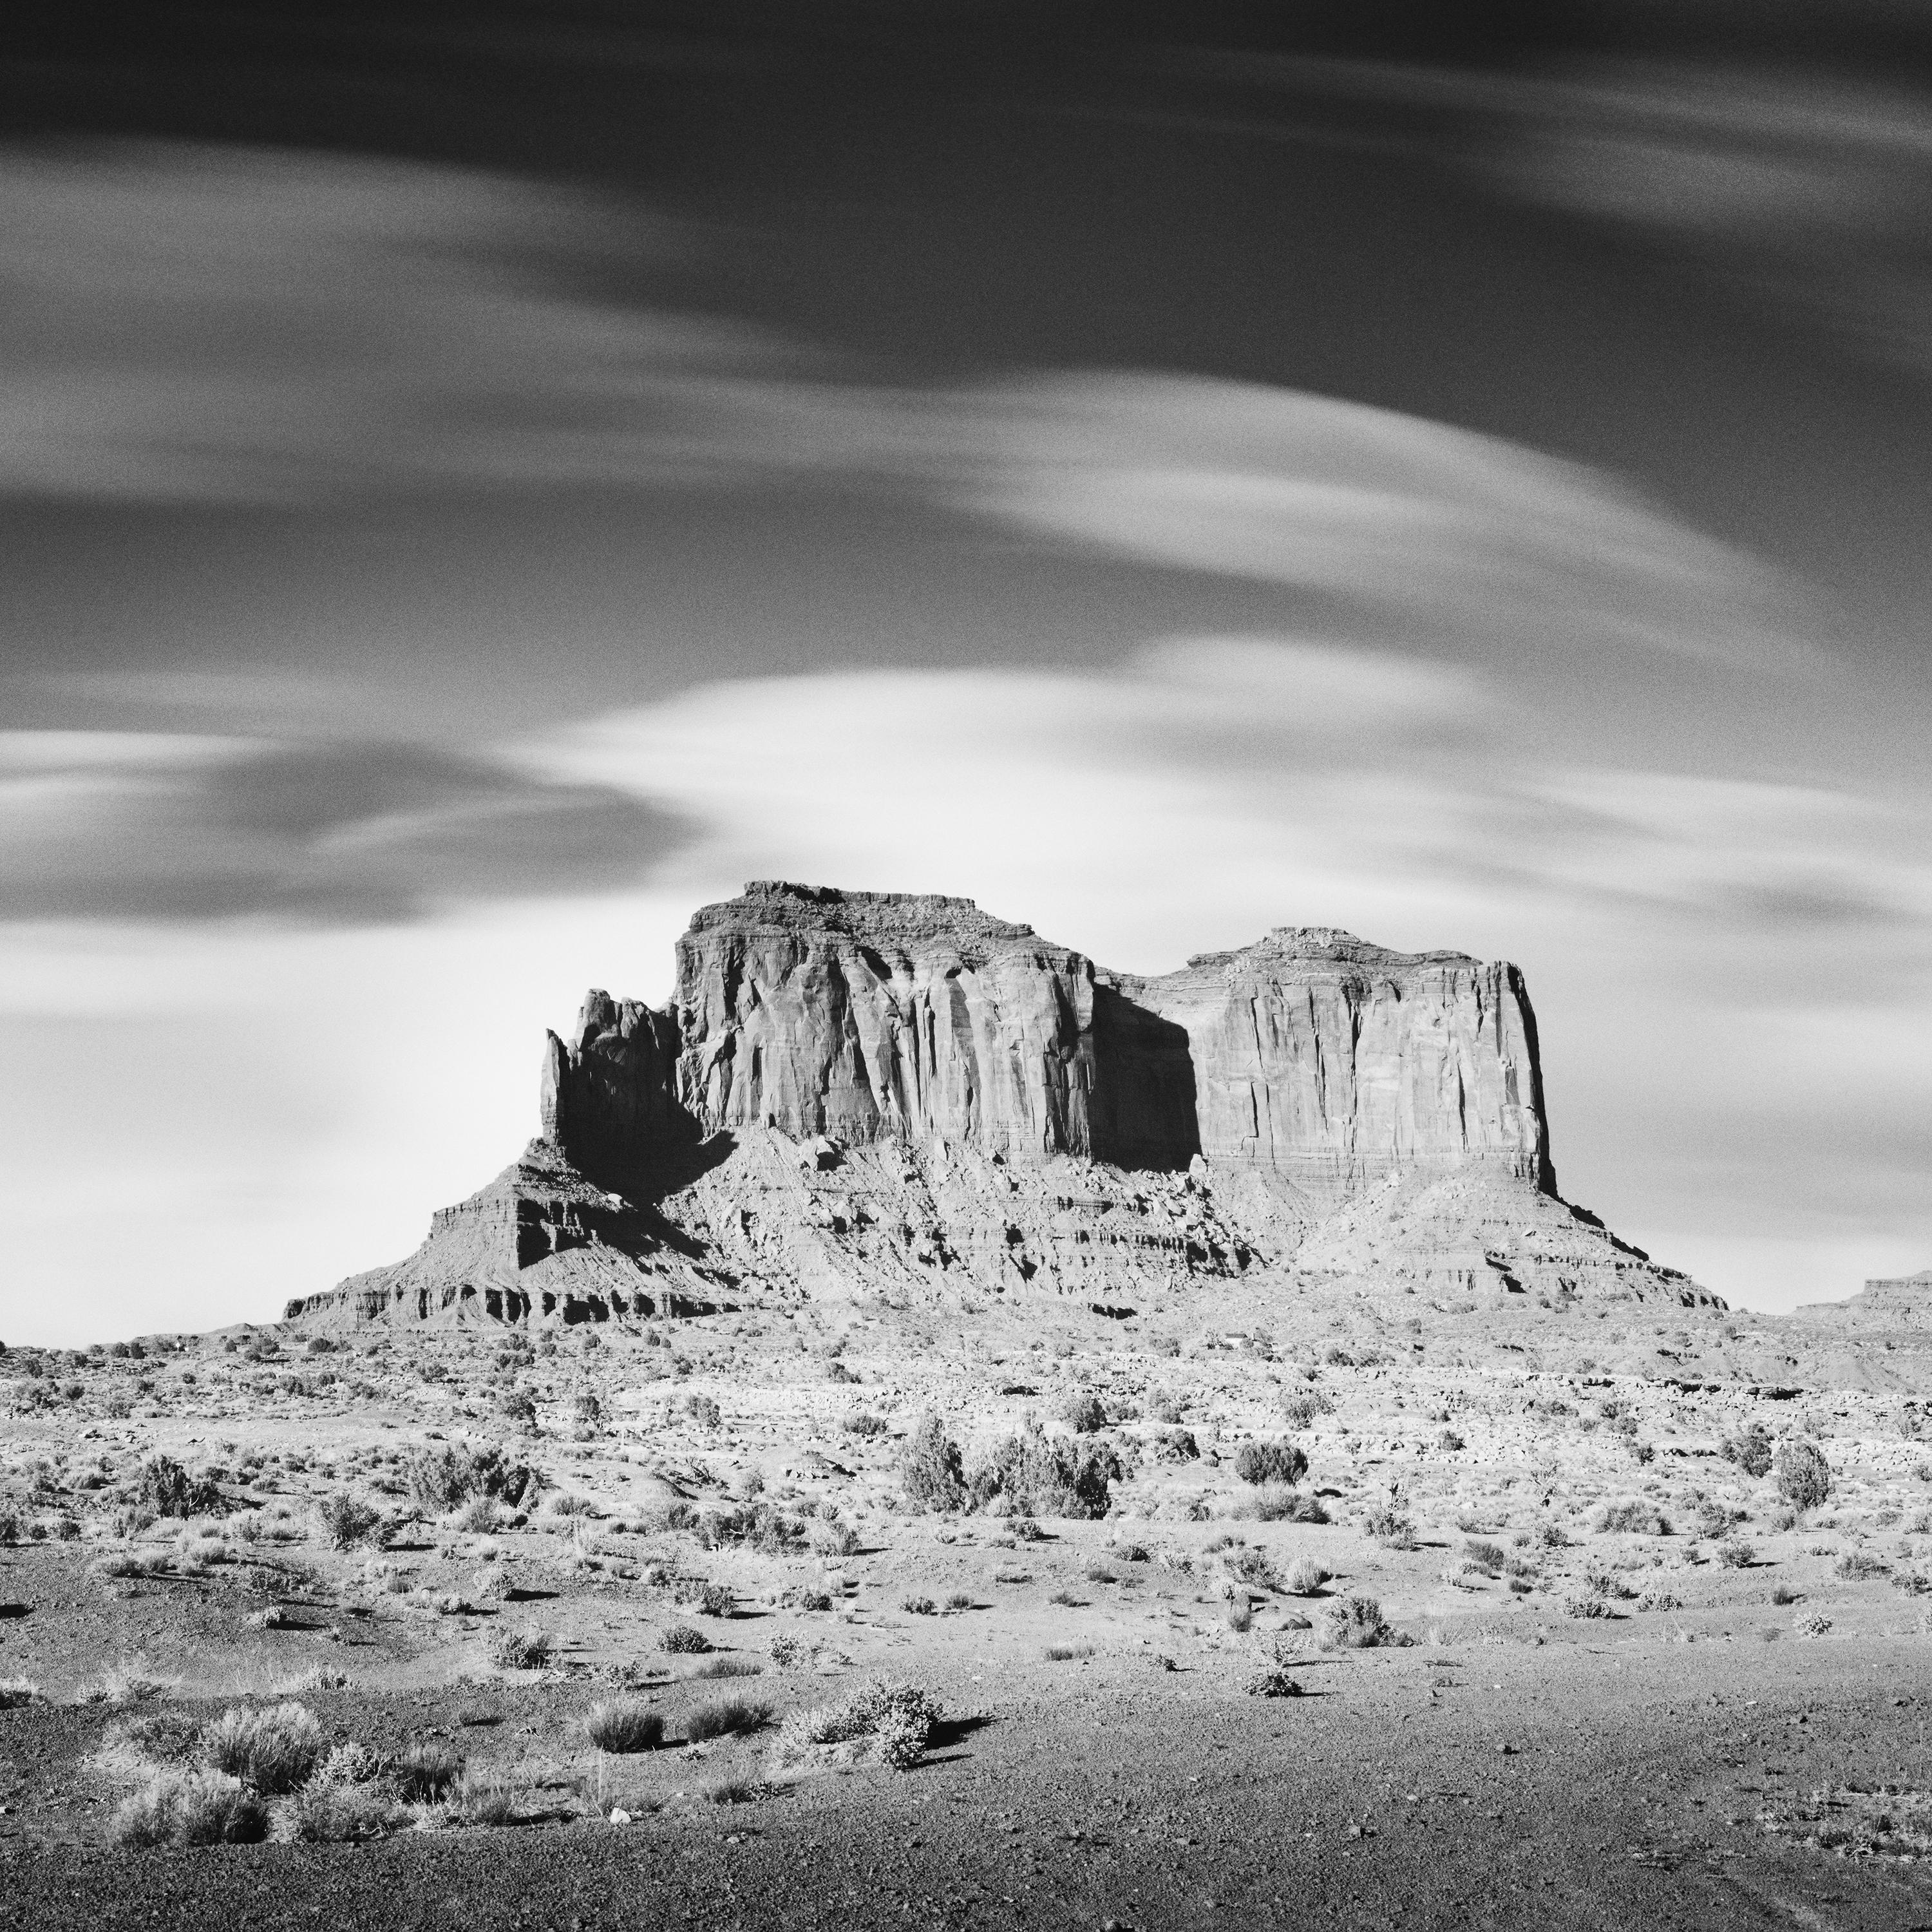 Black and White Fine Art landscape panorama photography - Wild West Panorama, Monument Valley, Utah, USA. Archival pigment ink print, edition of 7. Signed, titled, dated and numbered by artist. Certificate of authenticity included. Printed with 4cm